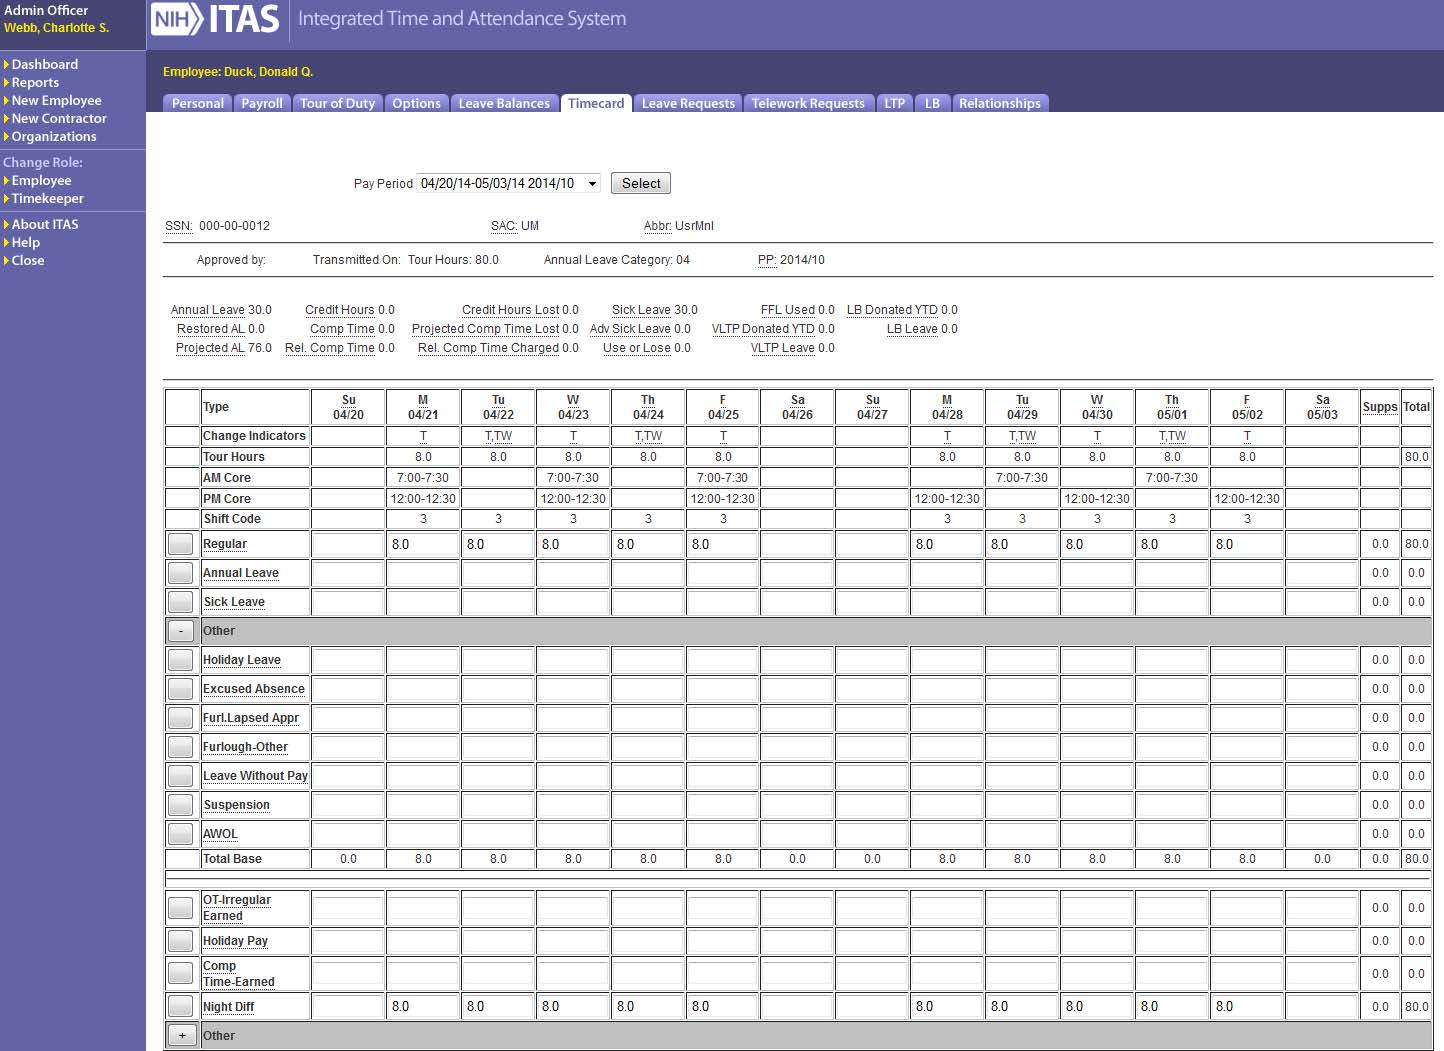 ITAS Timecard screen, Leave Types Expanded